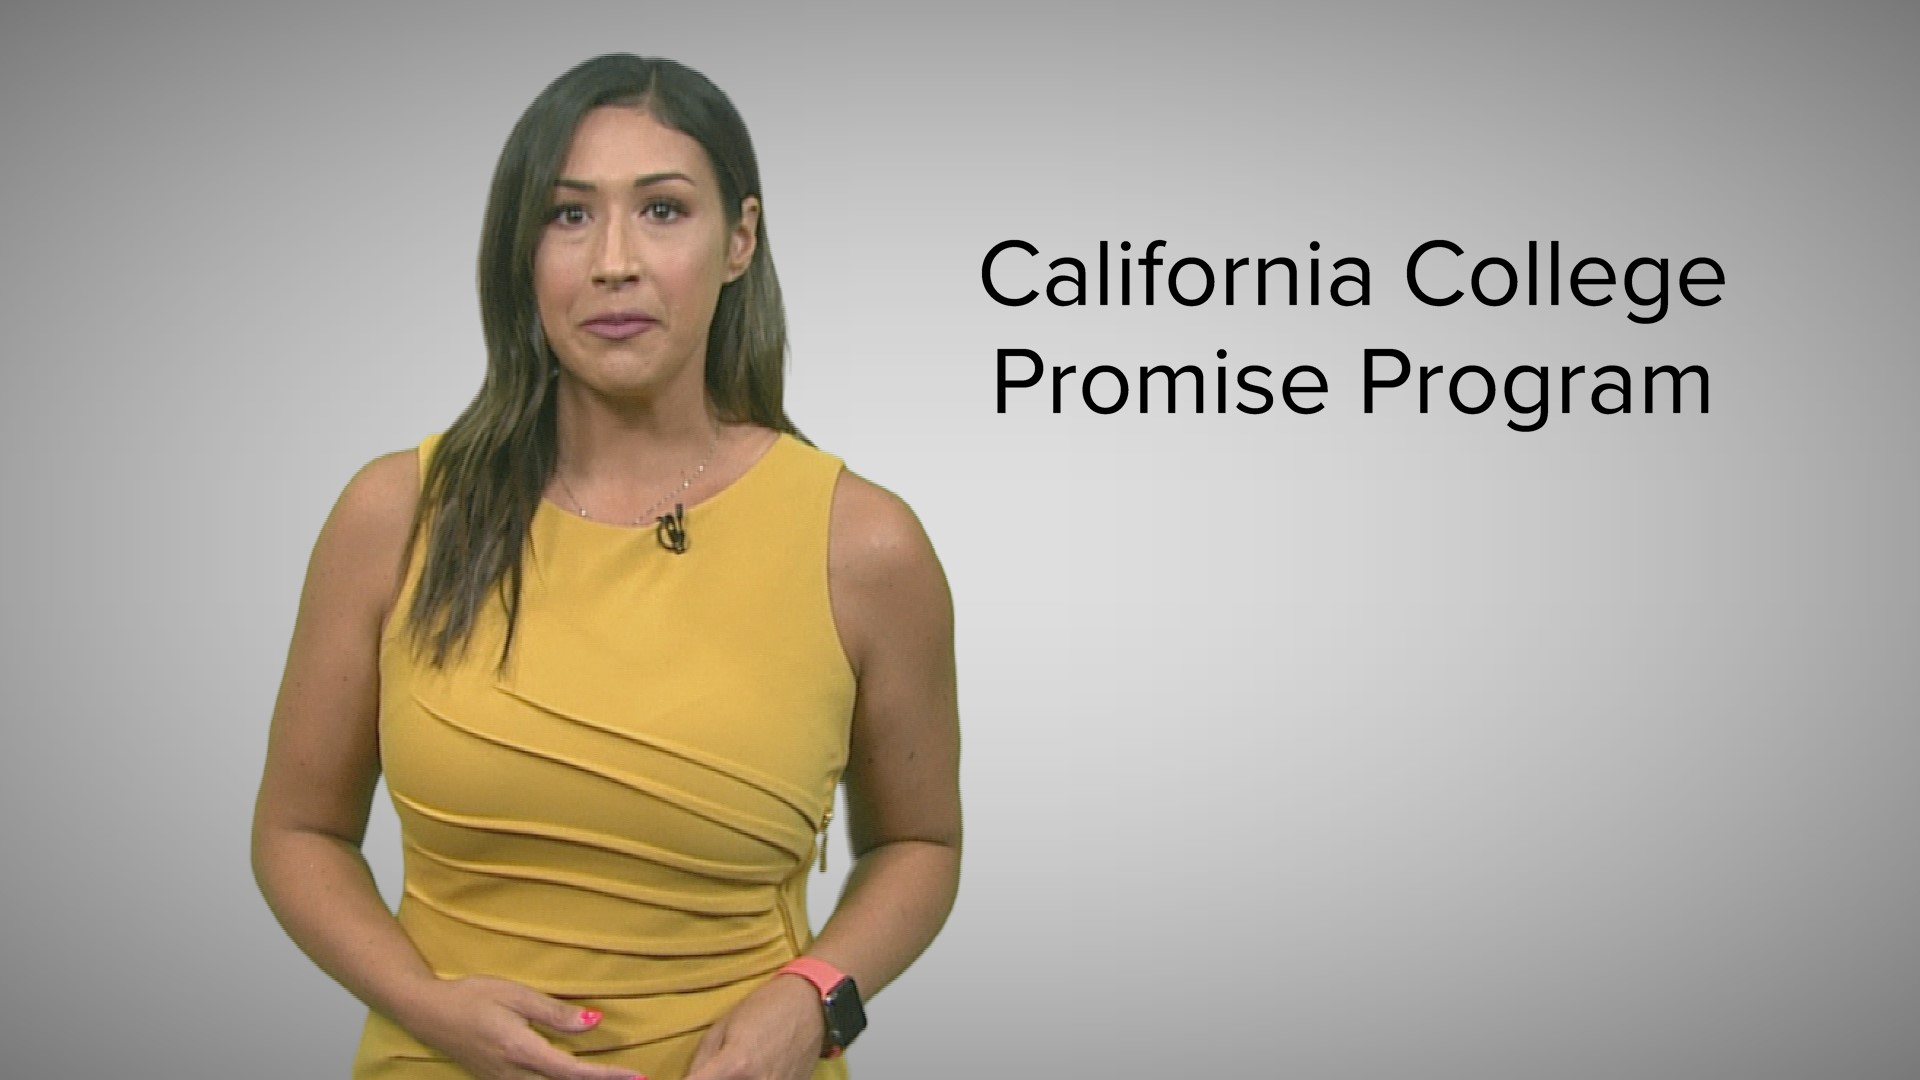 A recently expanded tuition waiver program in California means more students will have access to free community college. Here's what it takes to qualify for the California College Promise Program.